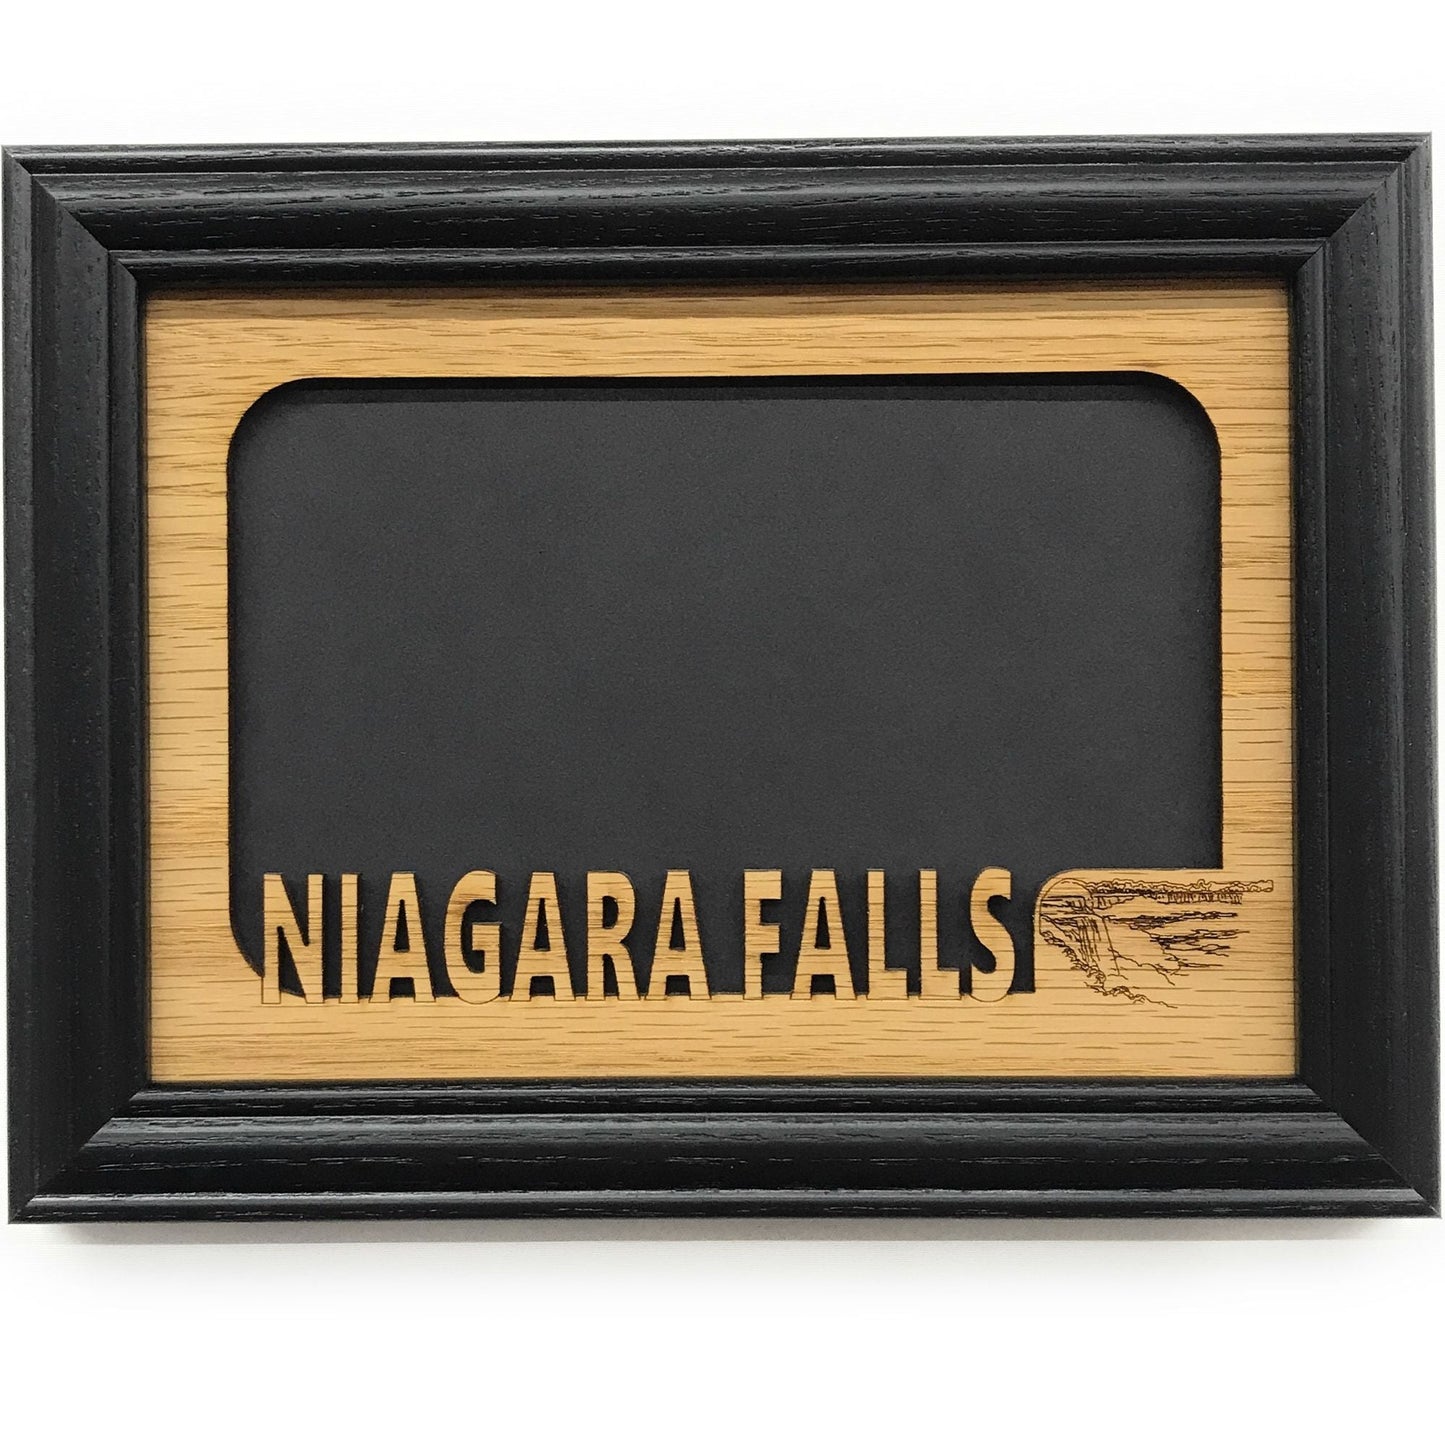 Niagara Falls Picture Frame - 5x7 Frame Hold 4x6 Photo - Legacy Images - Picture Frames